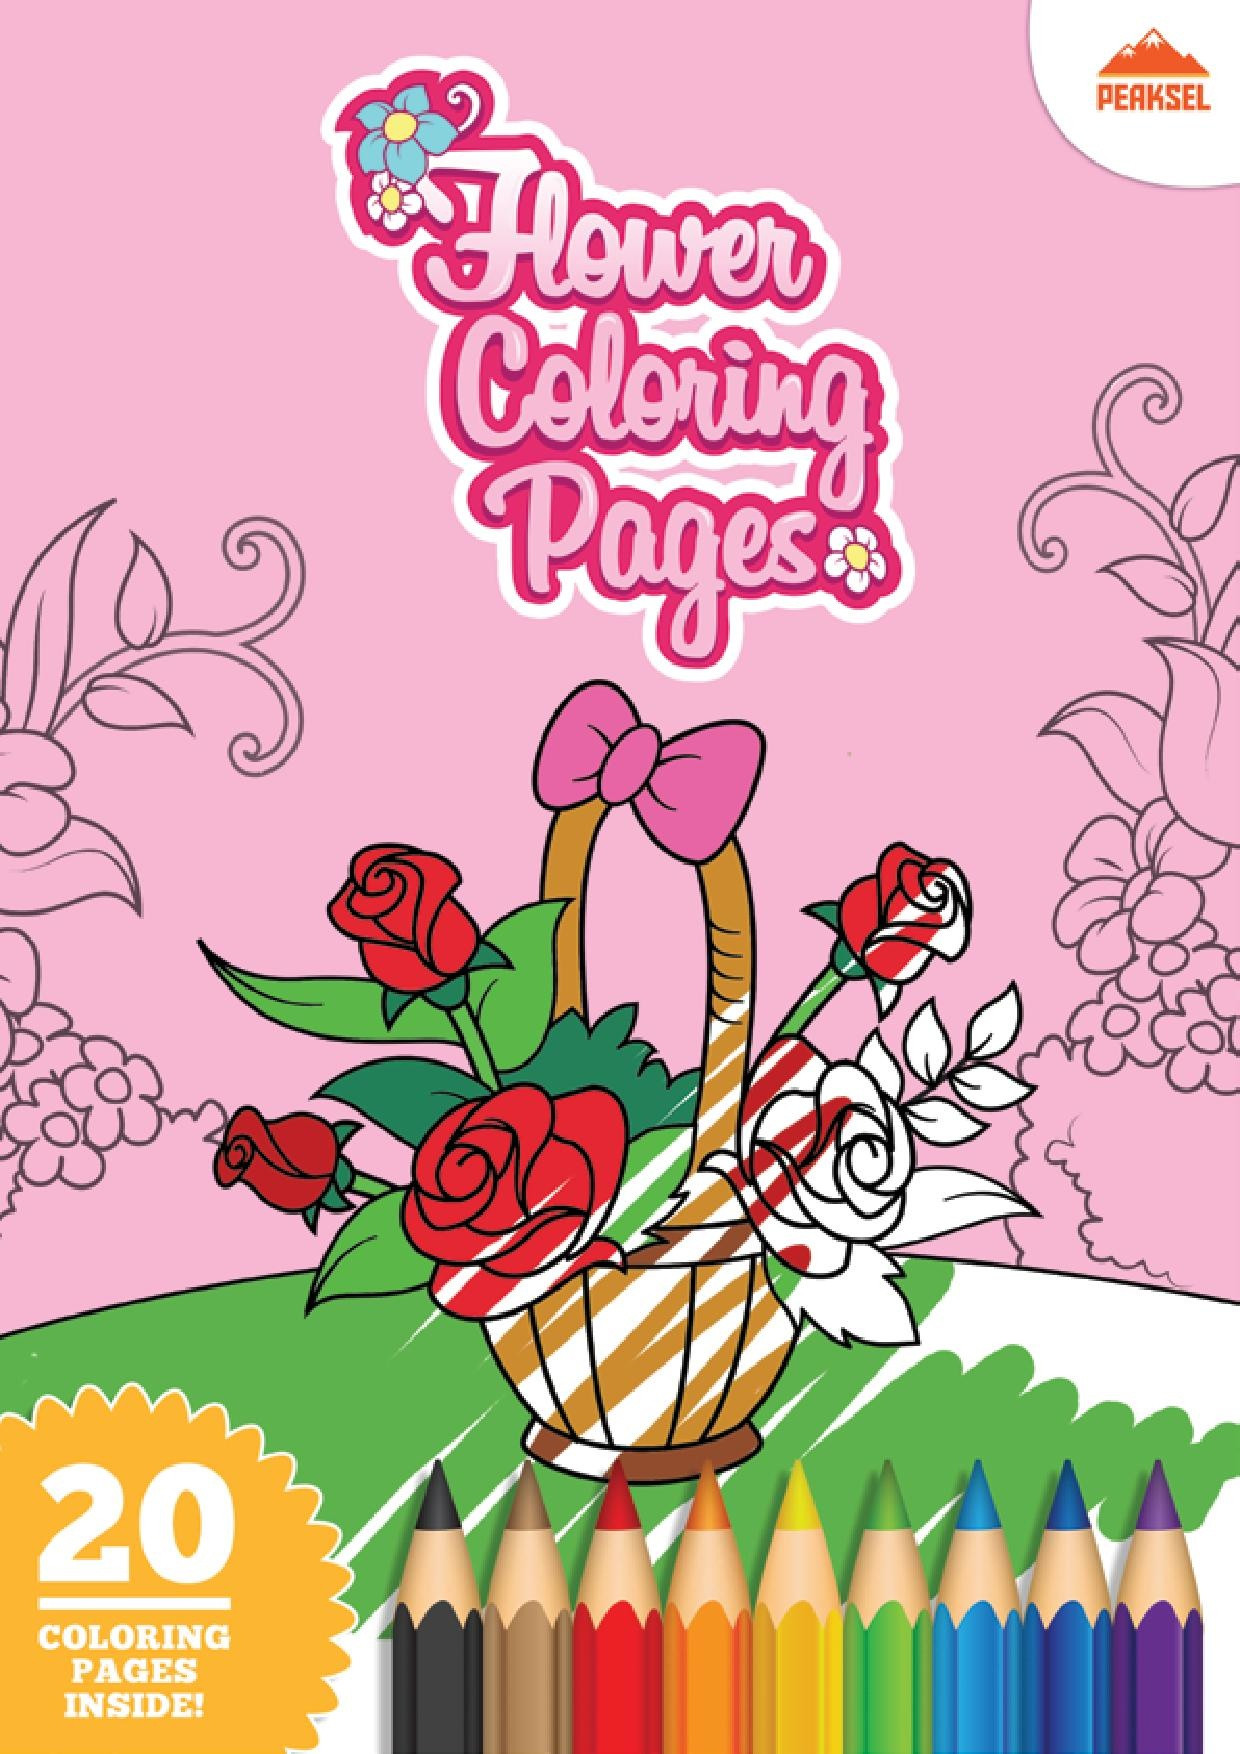 Printable Coloring Pages For Kids.Pdf
 File Flower Coloring Pages Printable Coloring Book For